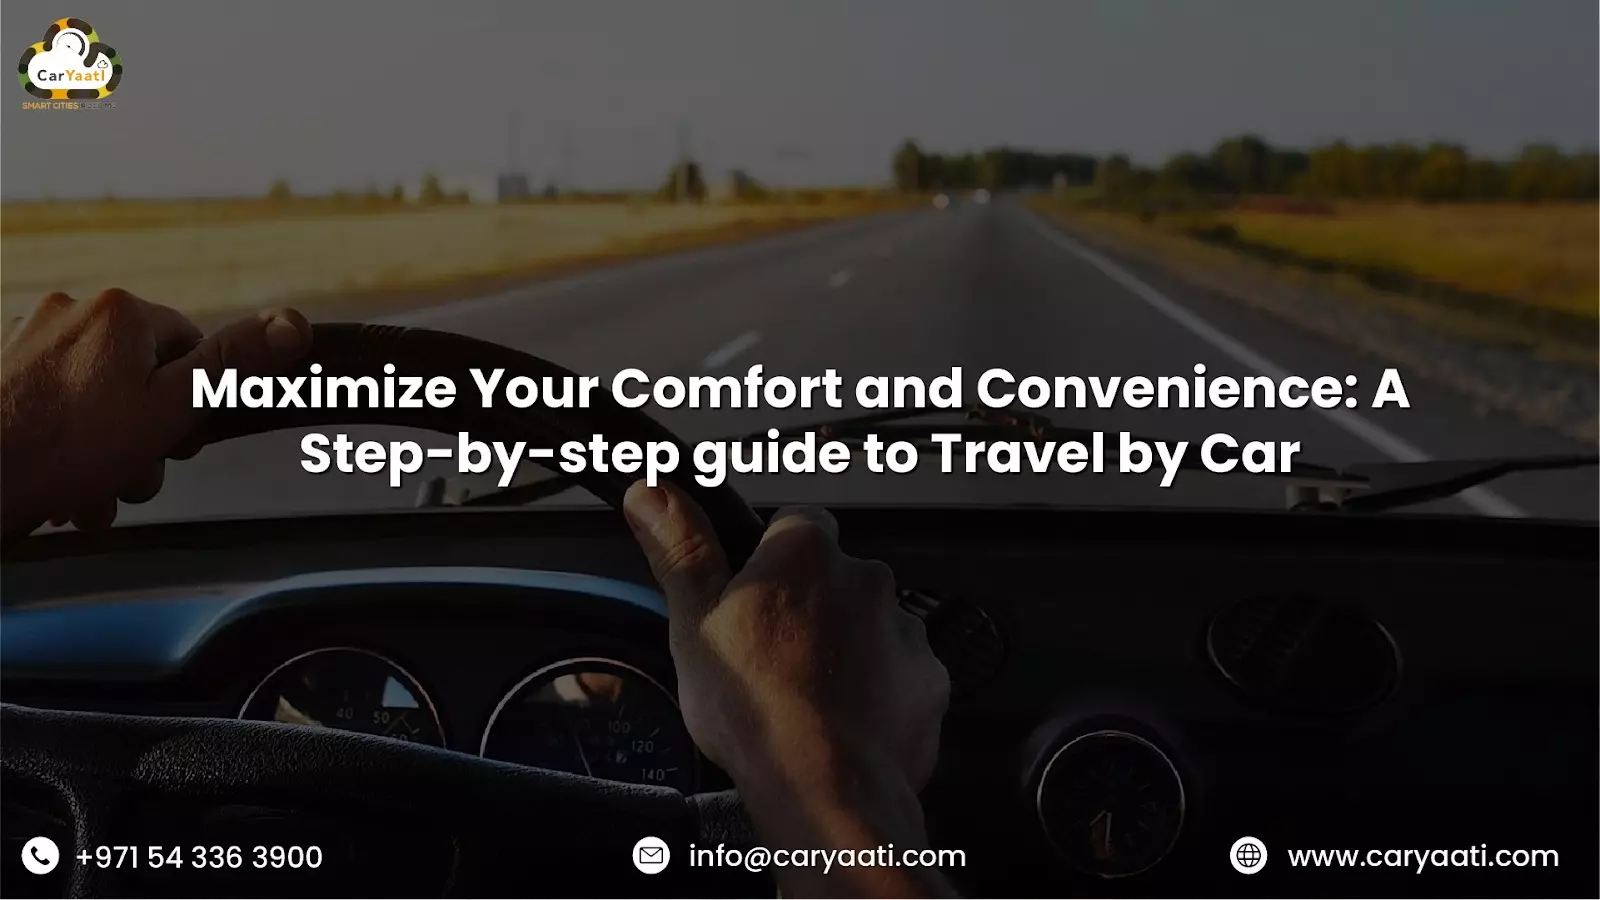 Maximize Your Comfort and Convenience: A Step-by-Step Guide to Traveling by Car